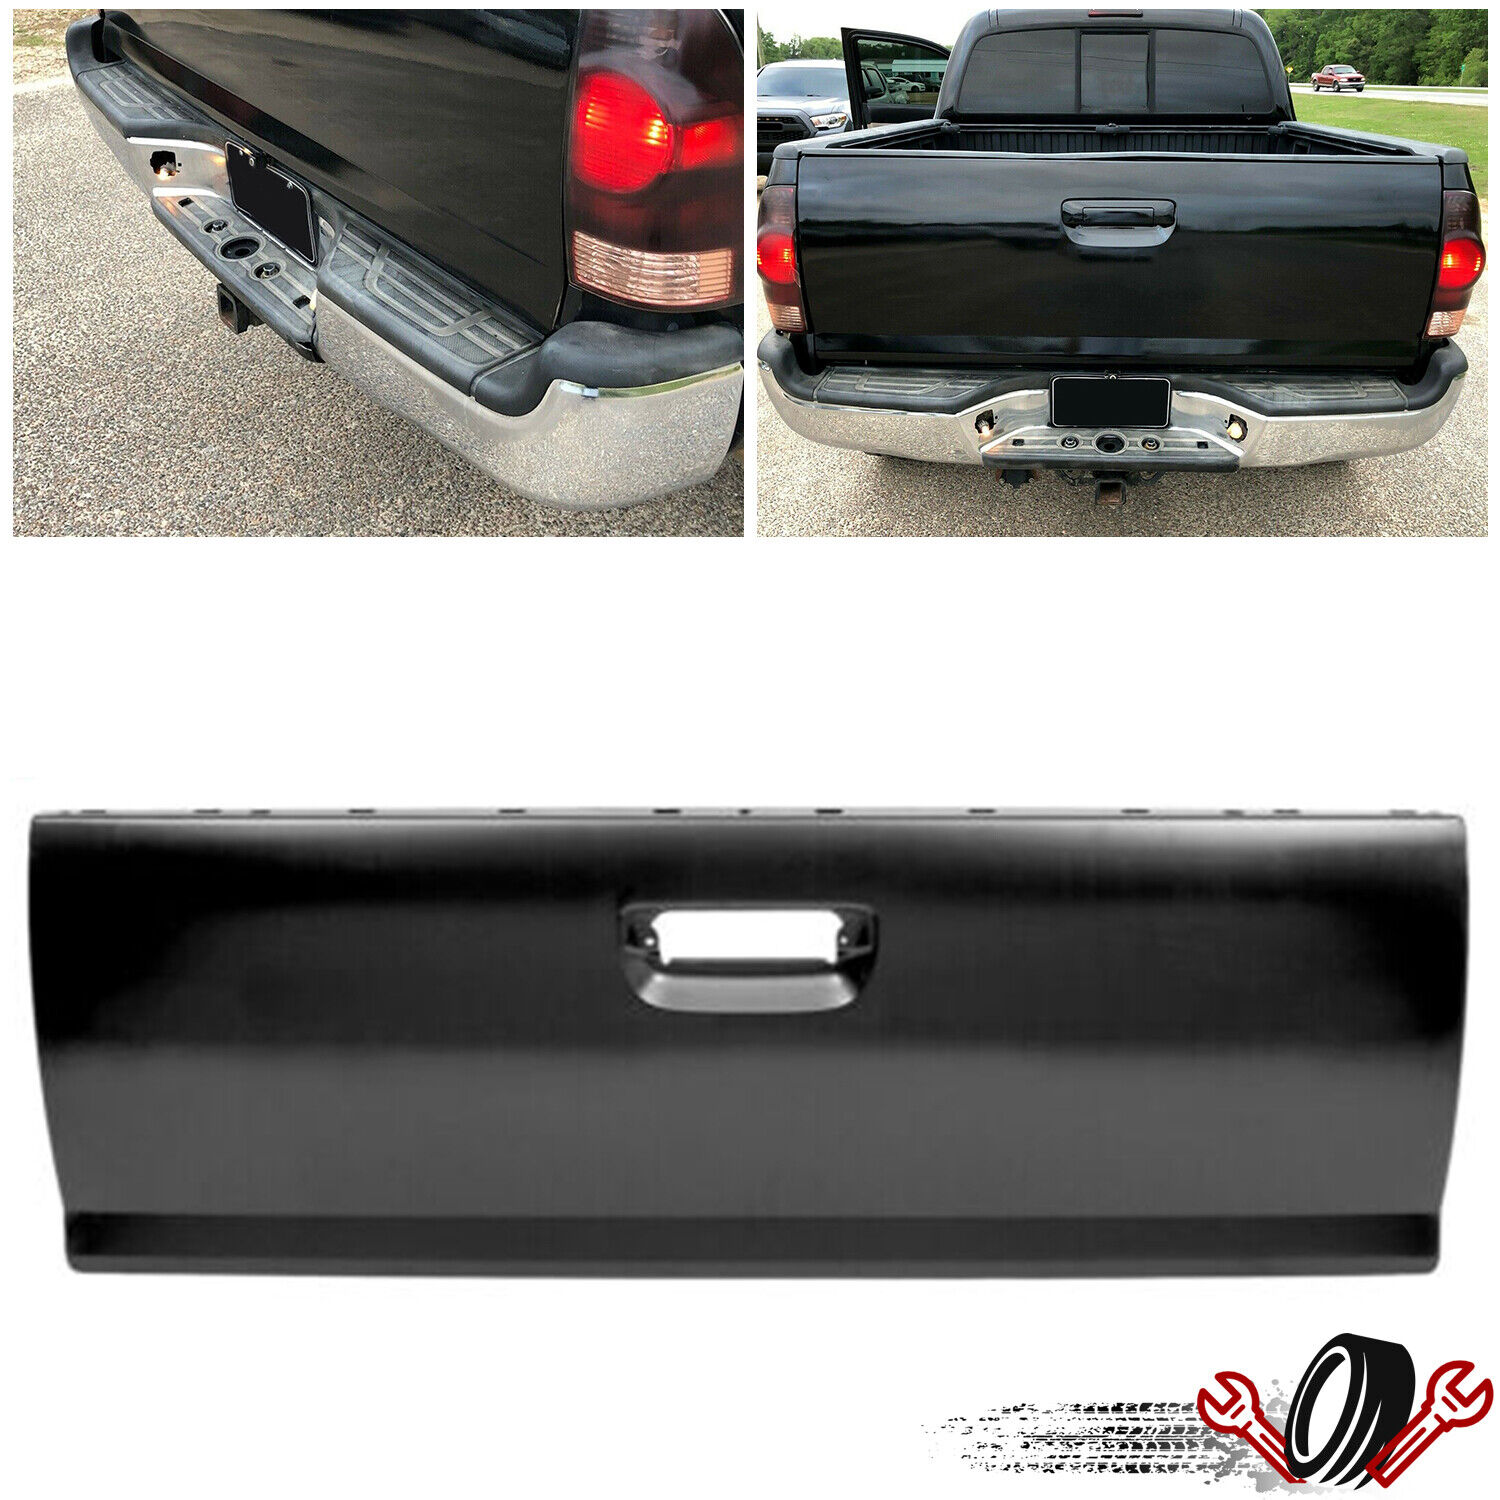 NEW Rear Tailgate Primer Steel Assembly For Toyota Tacoma 2005-2015